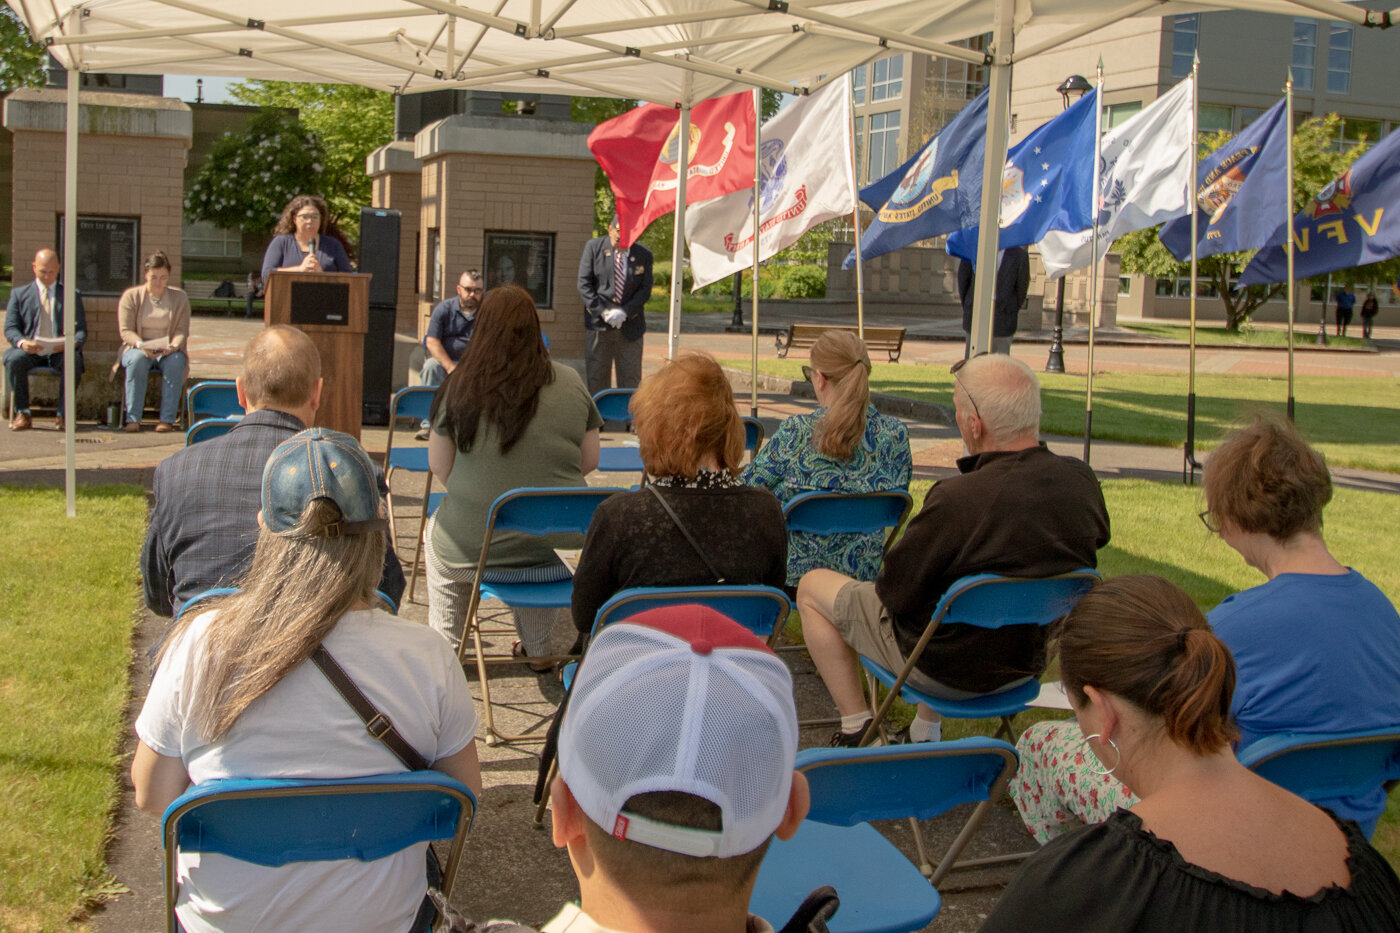 Centralia College staff member Kathy Tukes opens up the colleges Memorial Day ceremony this past Thursday morning.